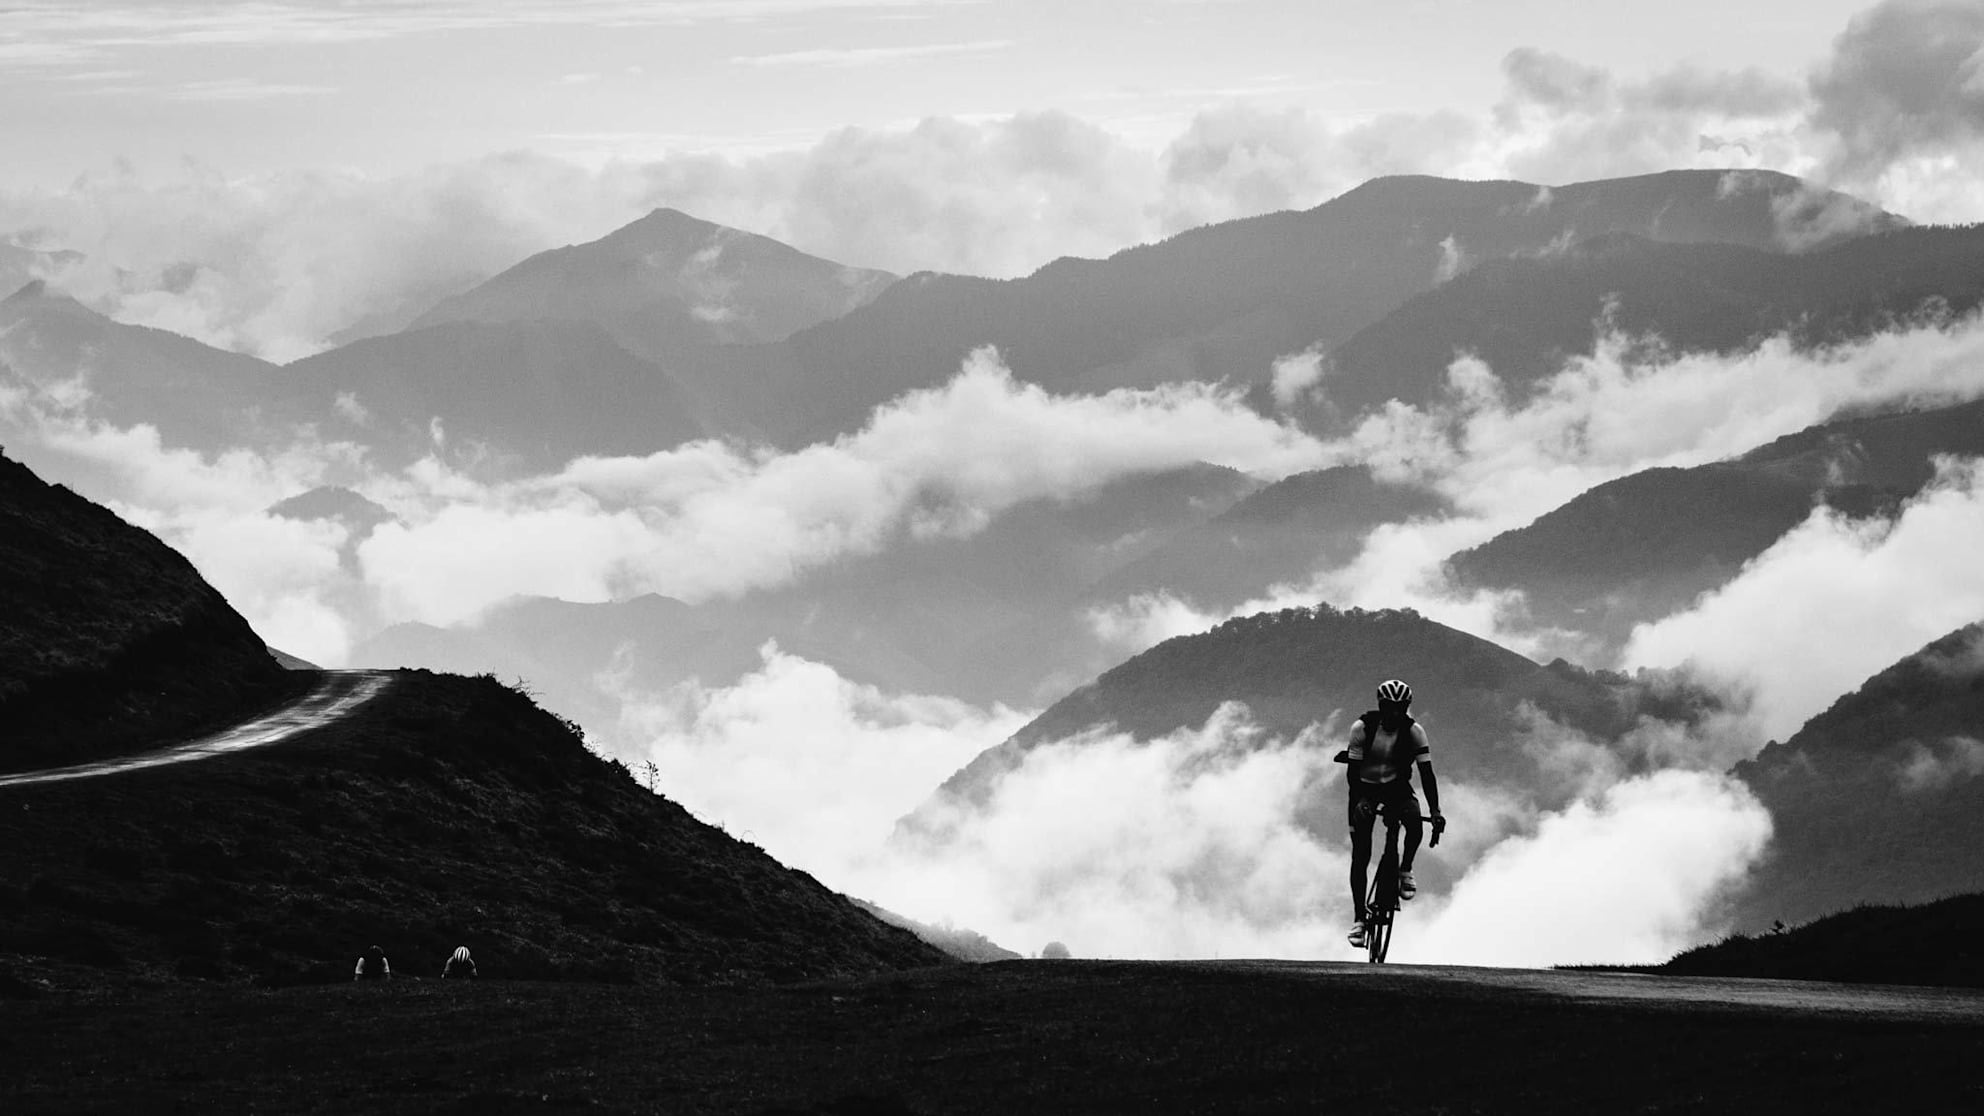 Last year, Phil Deeker, founder of Rapha Travel’s Cent Cols Challenge, set out to ride 1,000 mountains in 100 days.